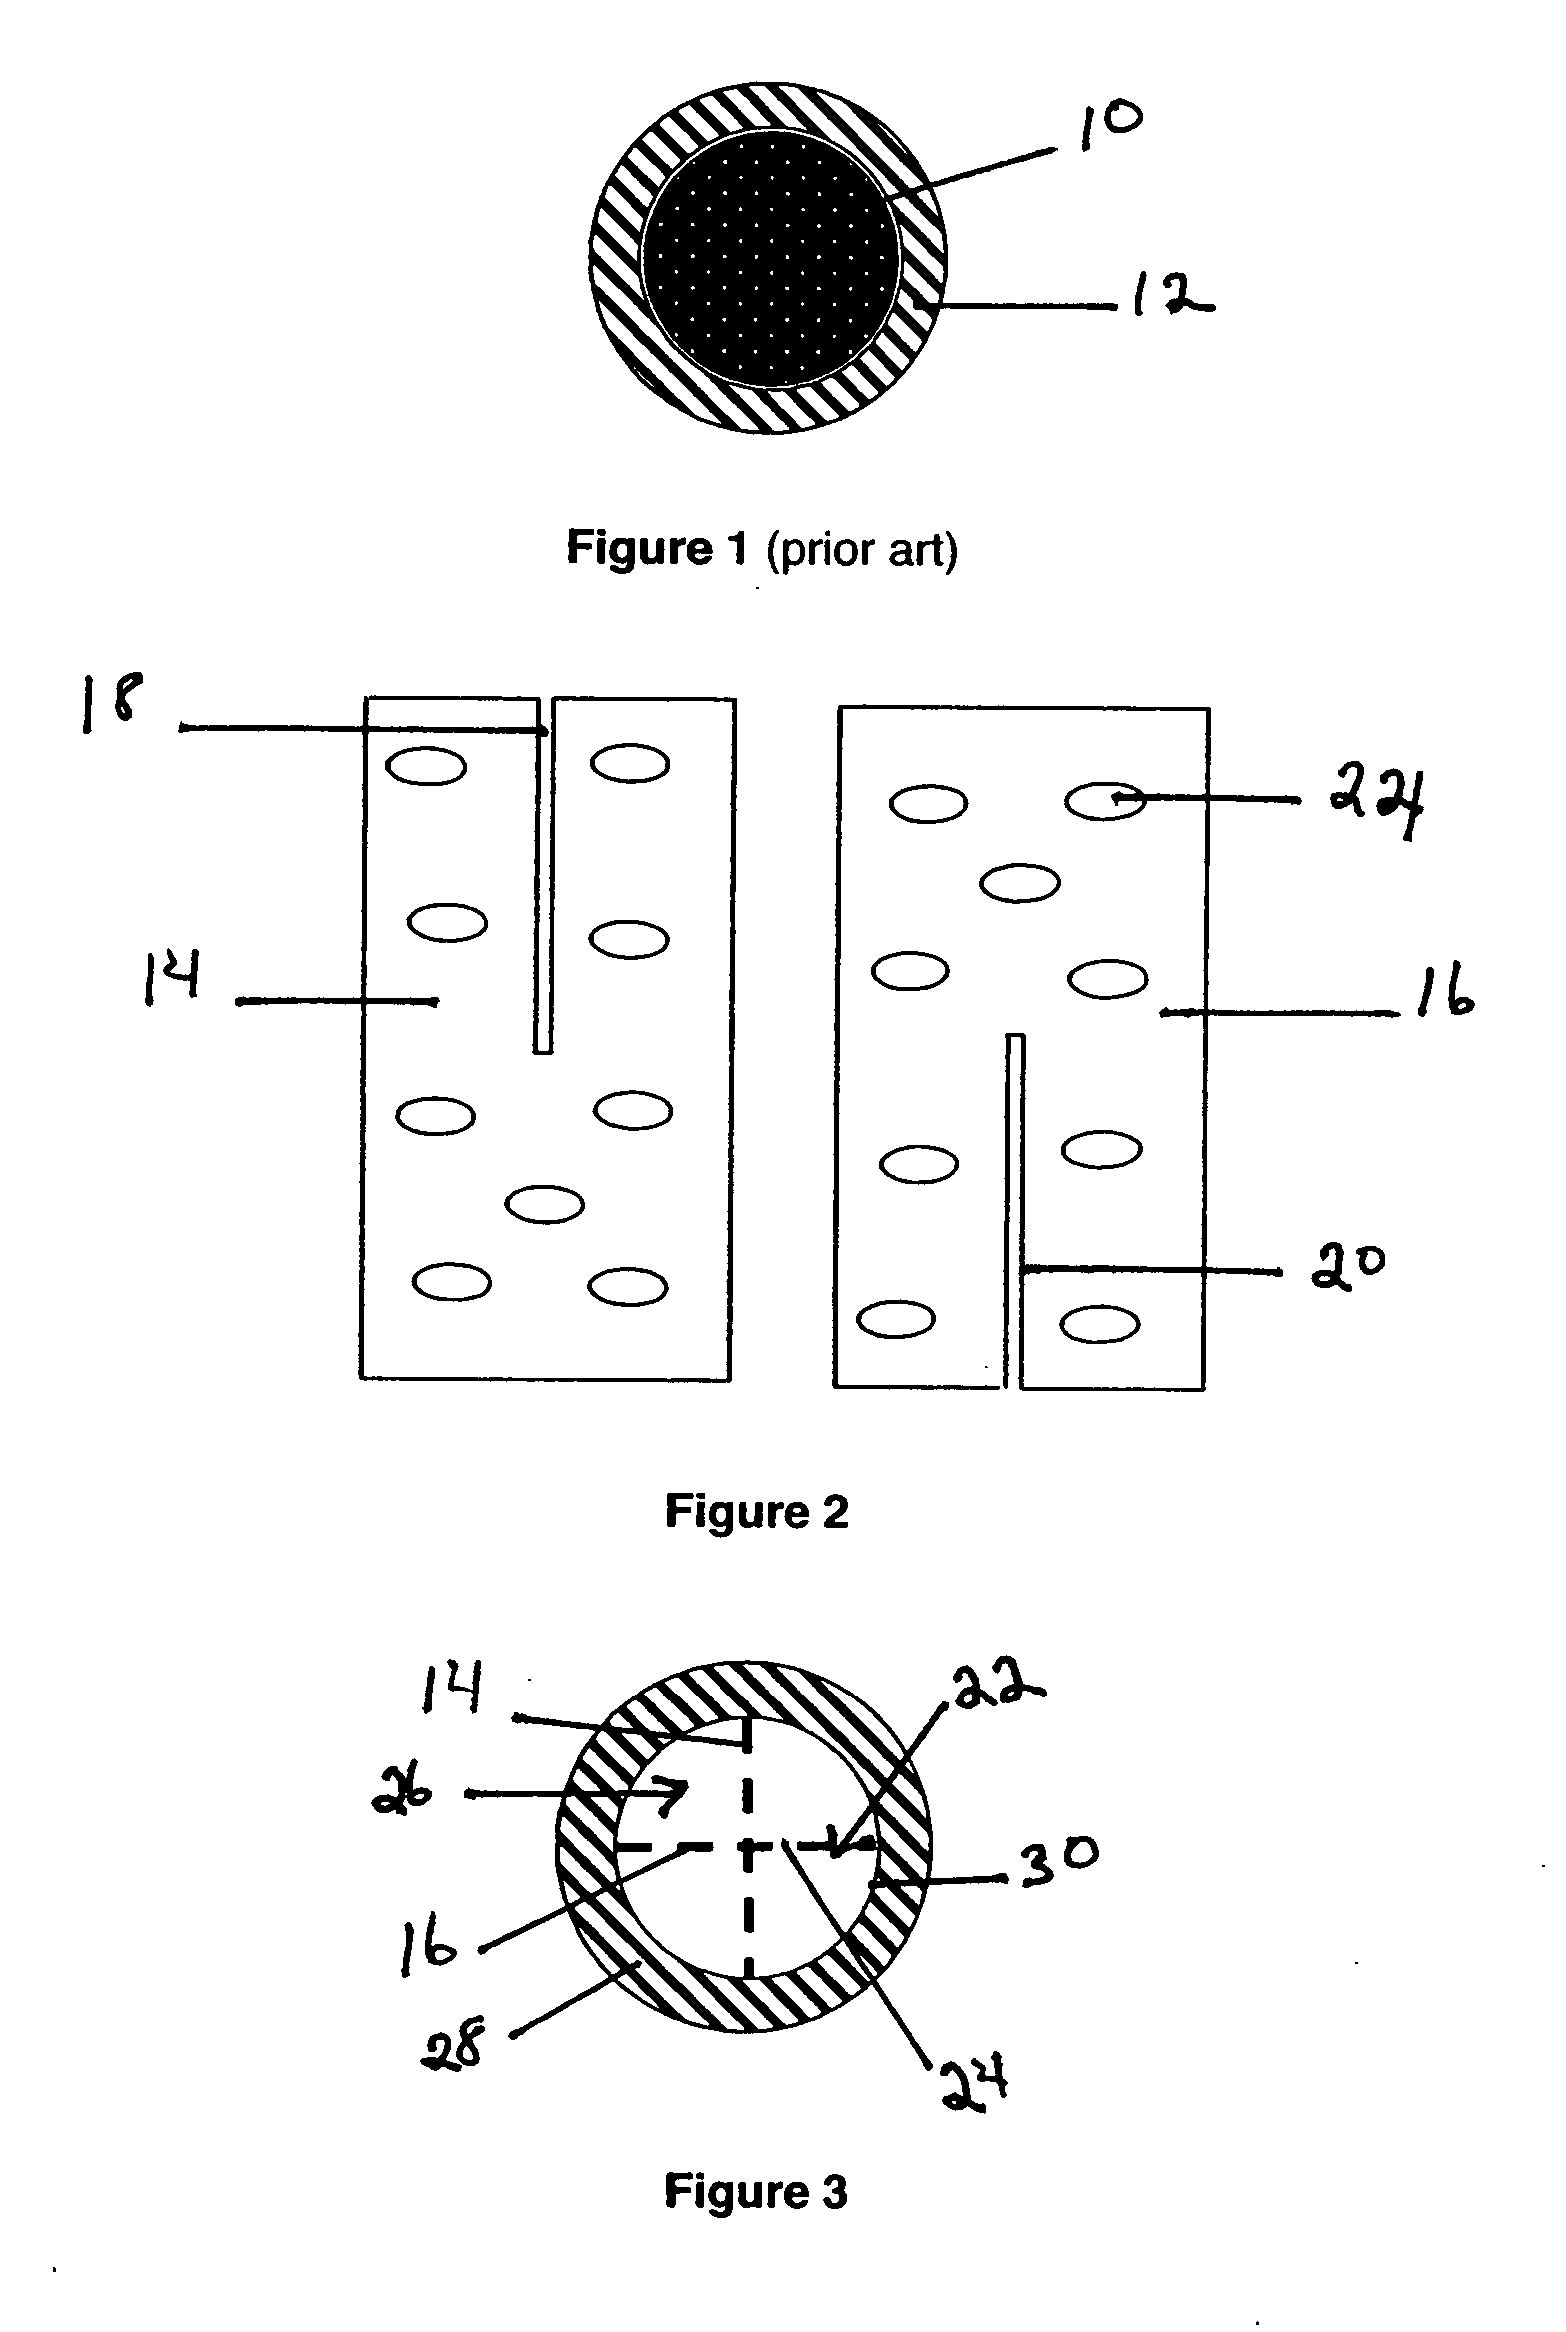 Bone implant device and methods of using same